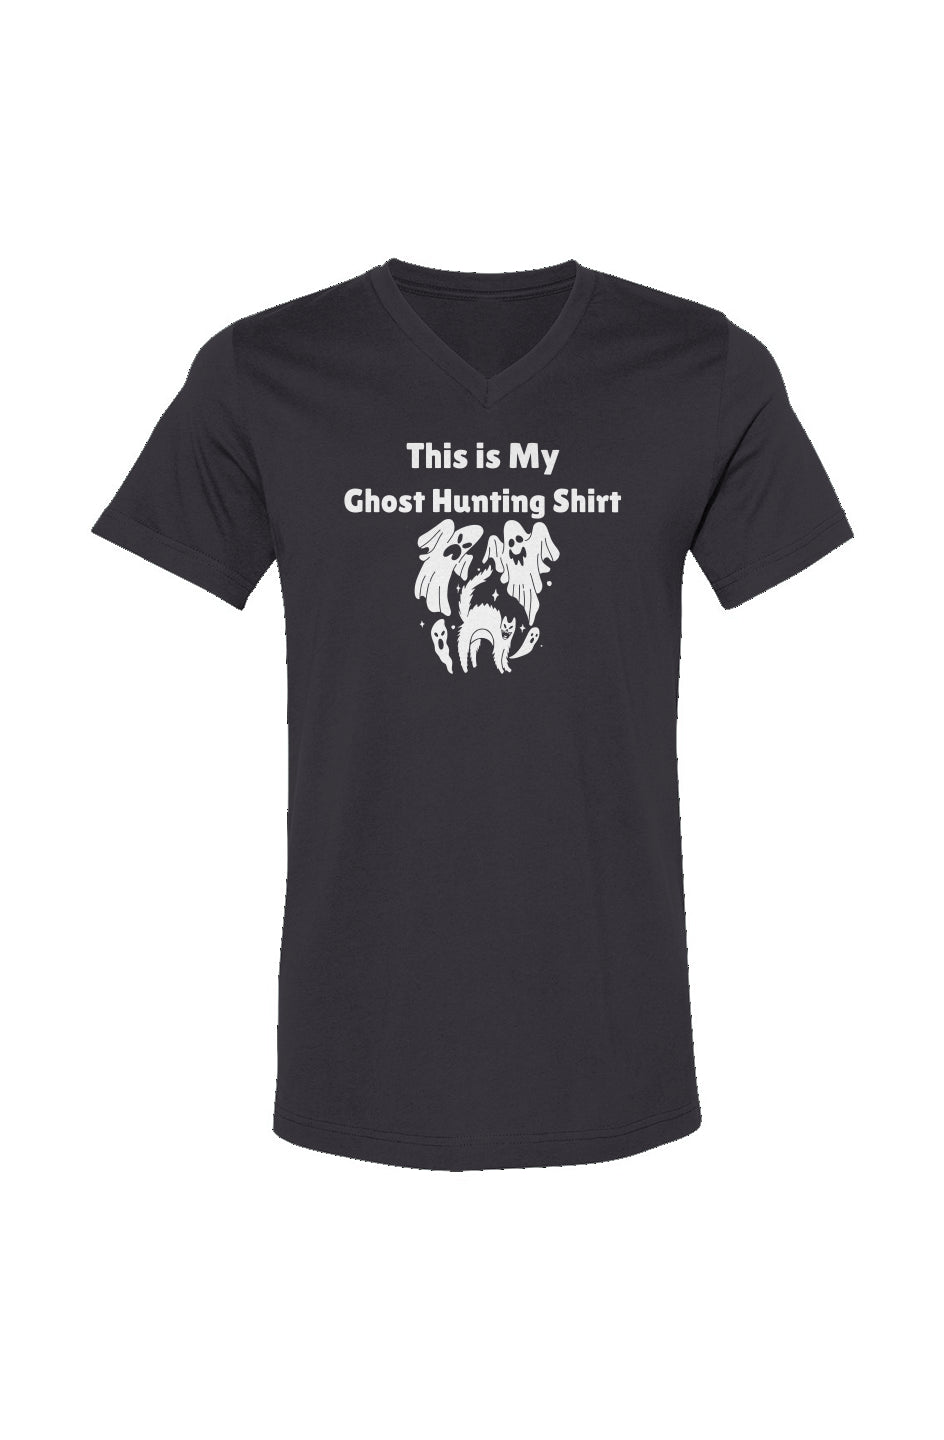 "This Is My Ghost Hunting Shirt" Unisex Fit